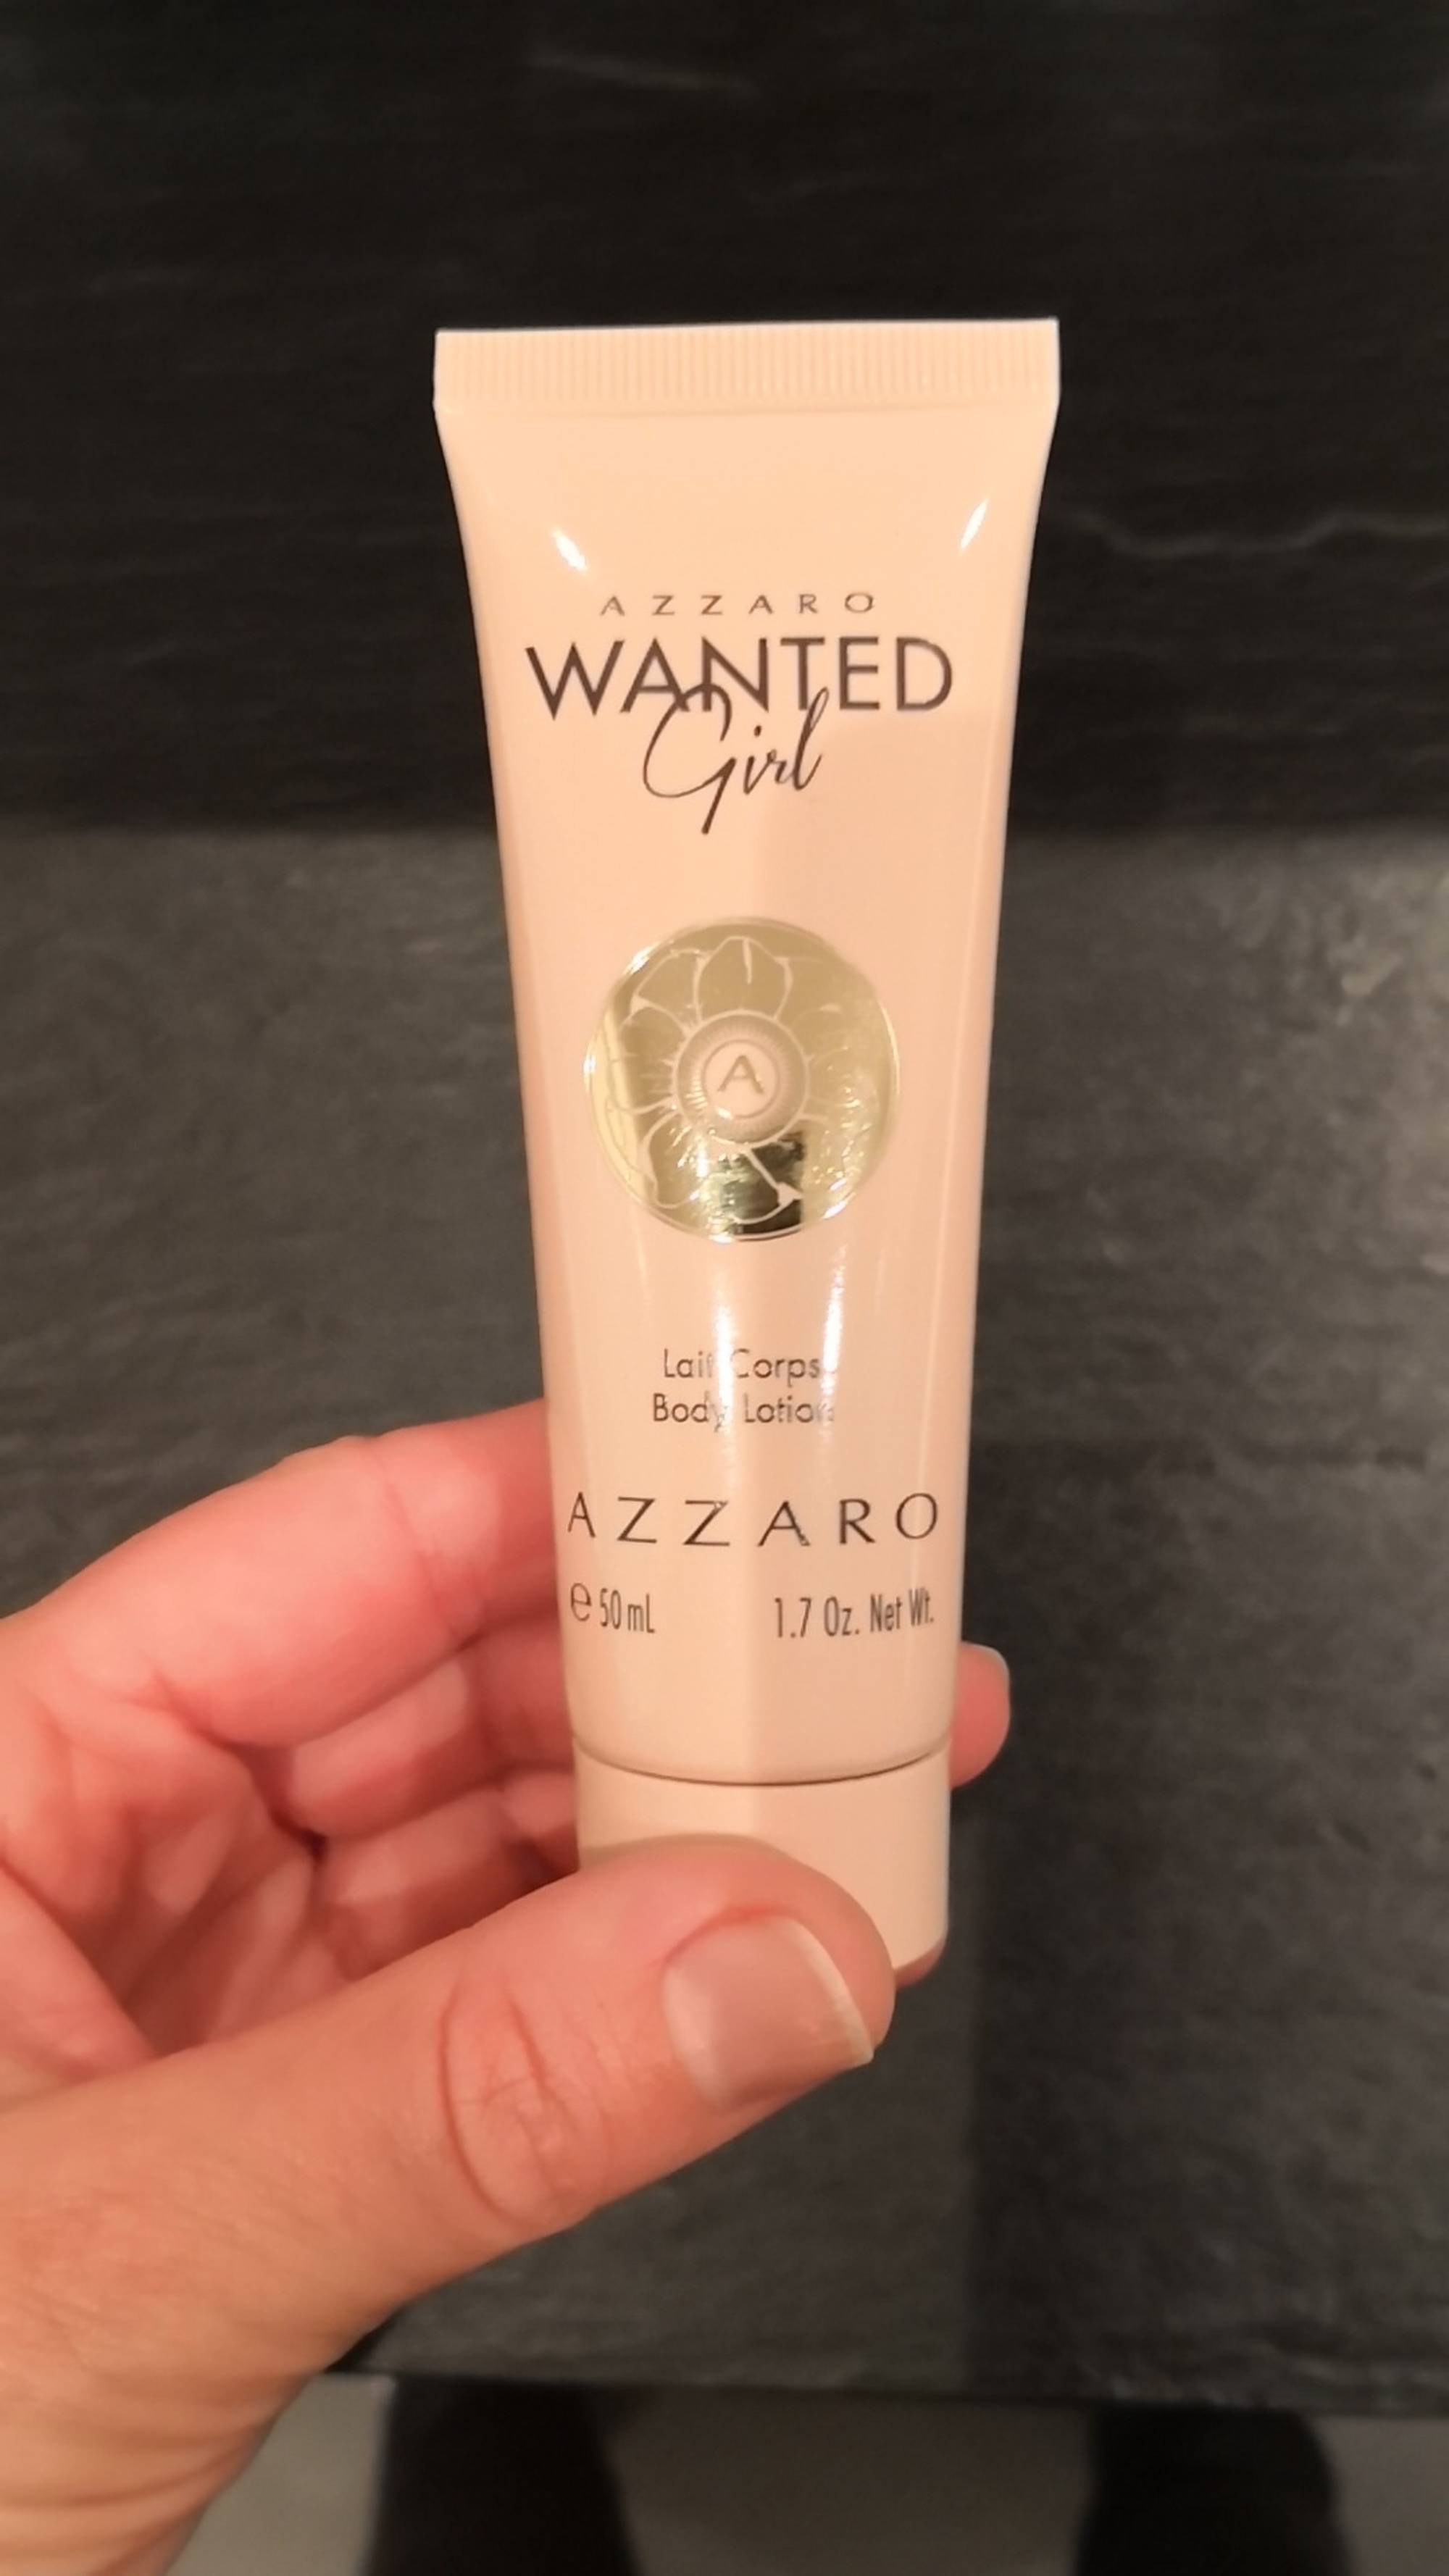 AZZARO - Wanted girl - Lait corps 